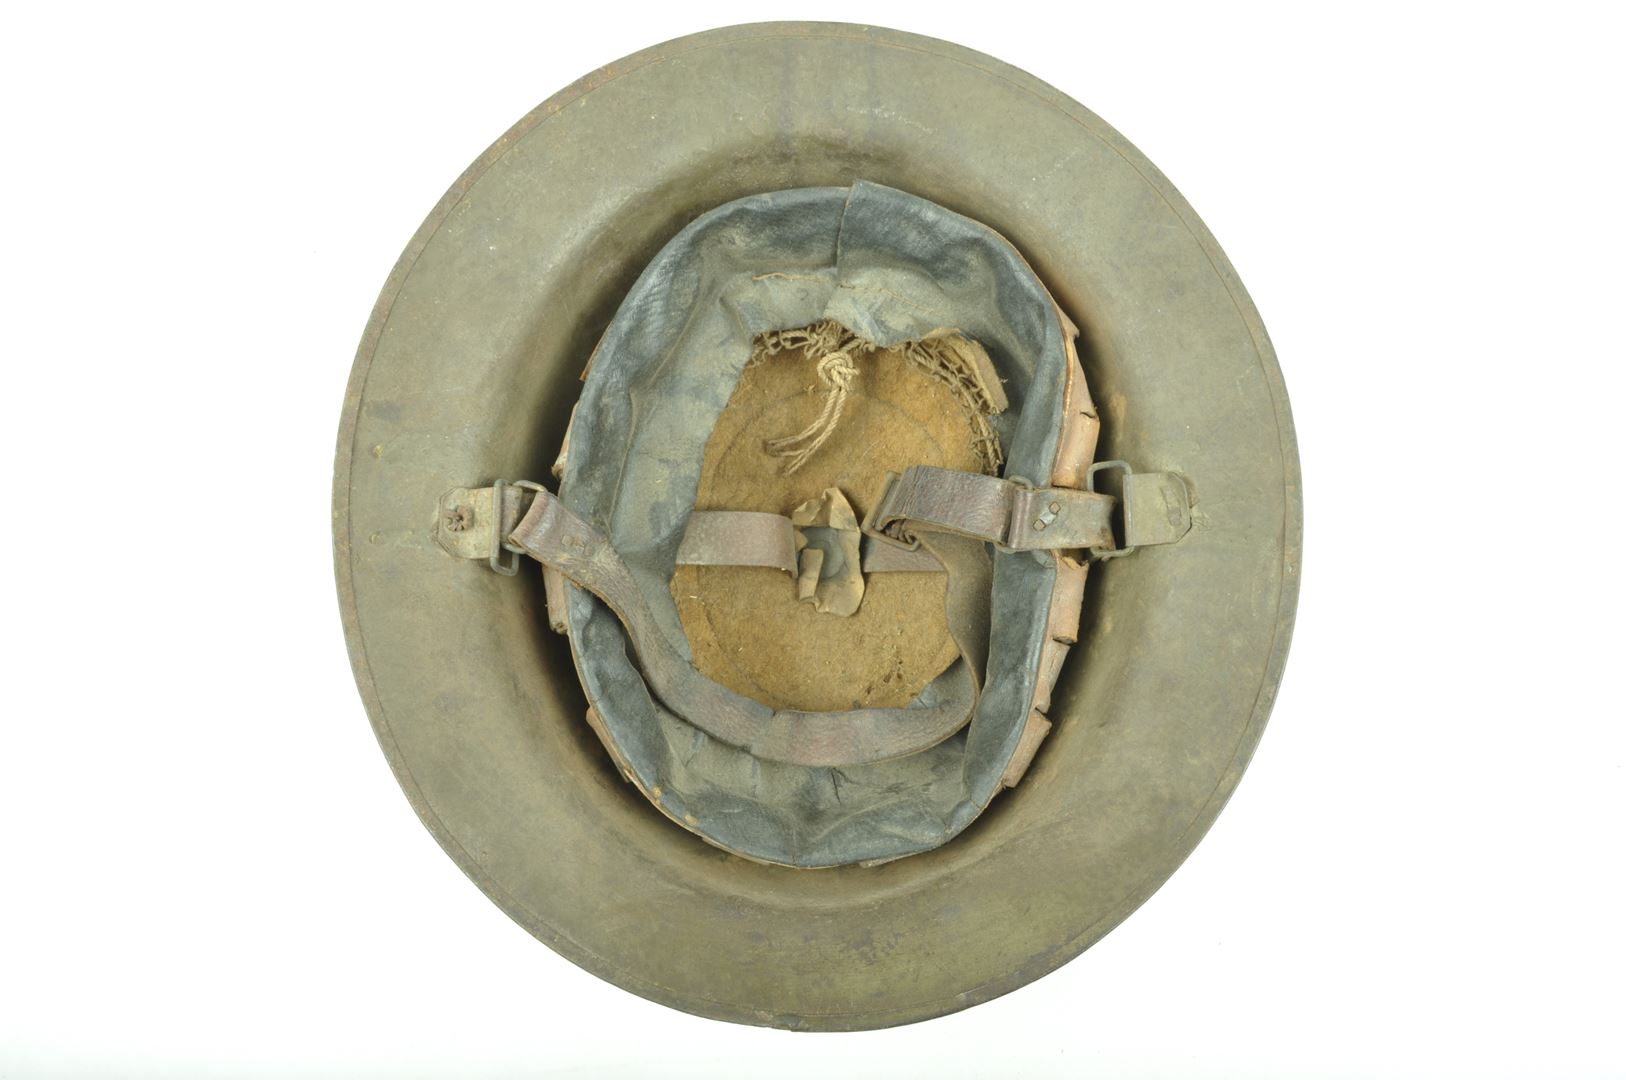 Casque US 17 / 28th infantry division "Keystone"